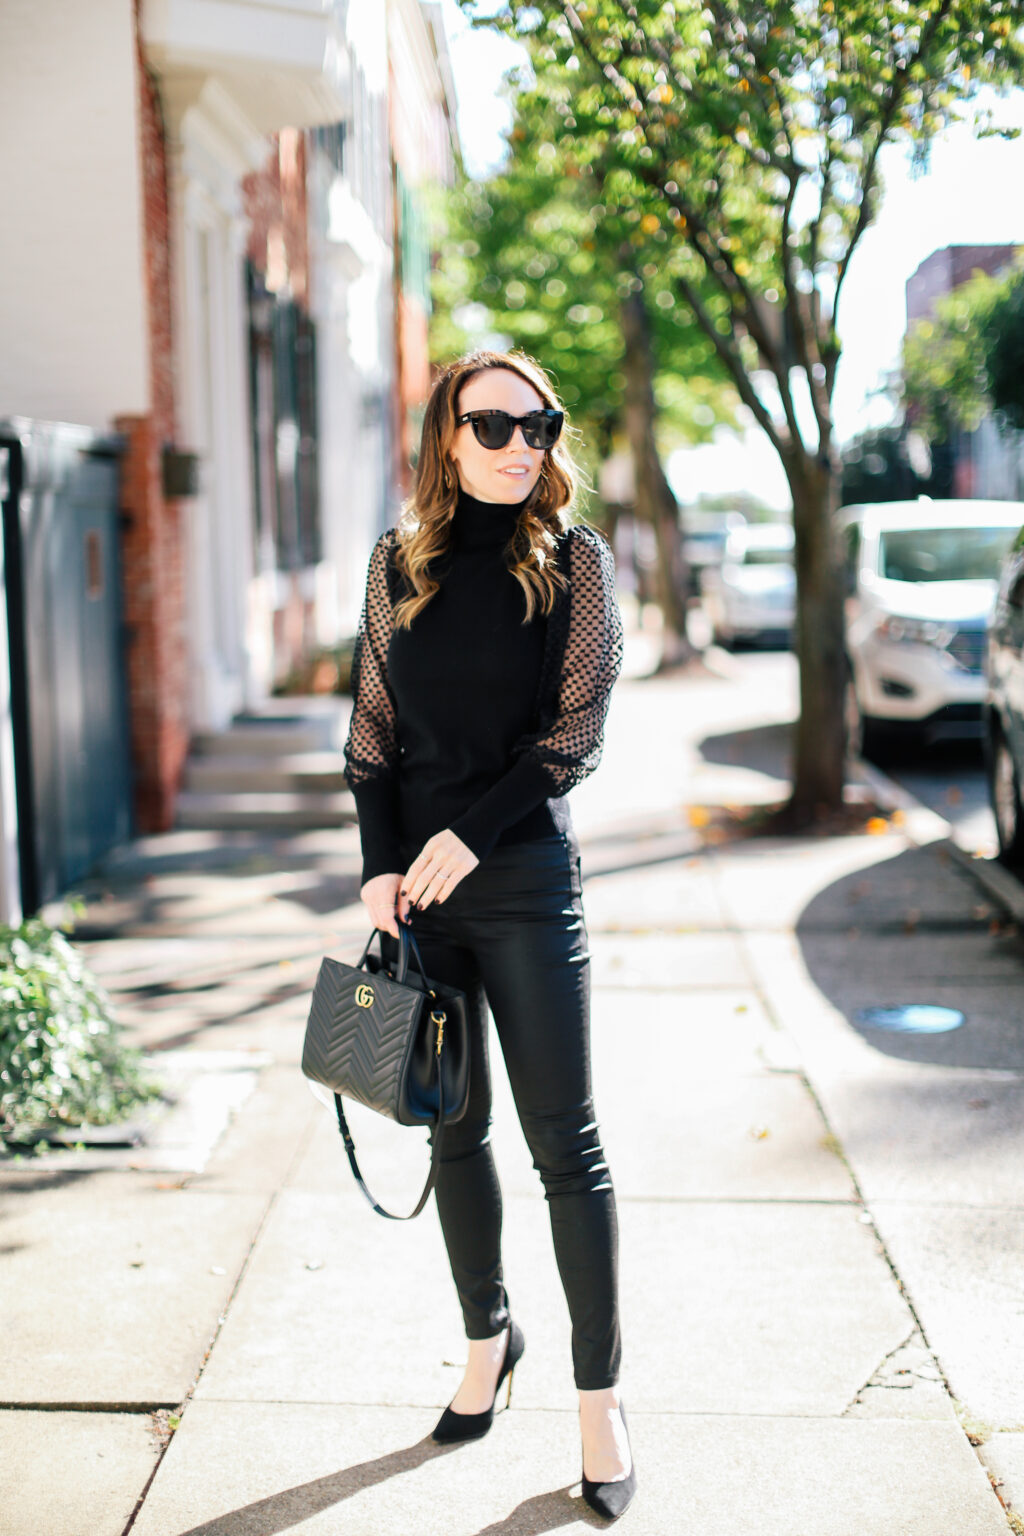 An affordable option to leather pants: coated denim! - alittlebitetc